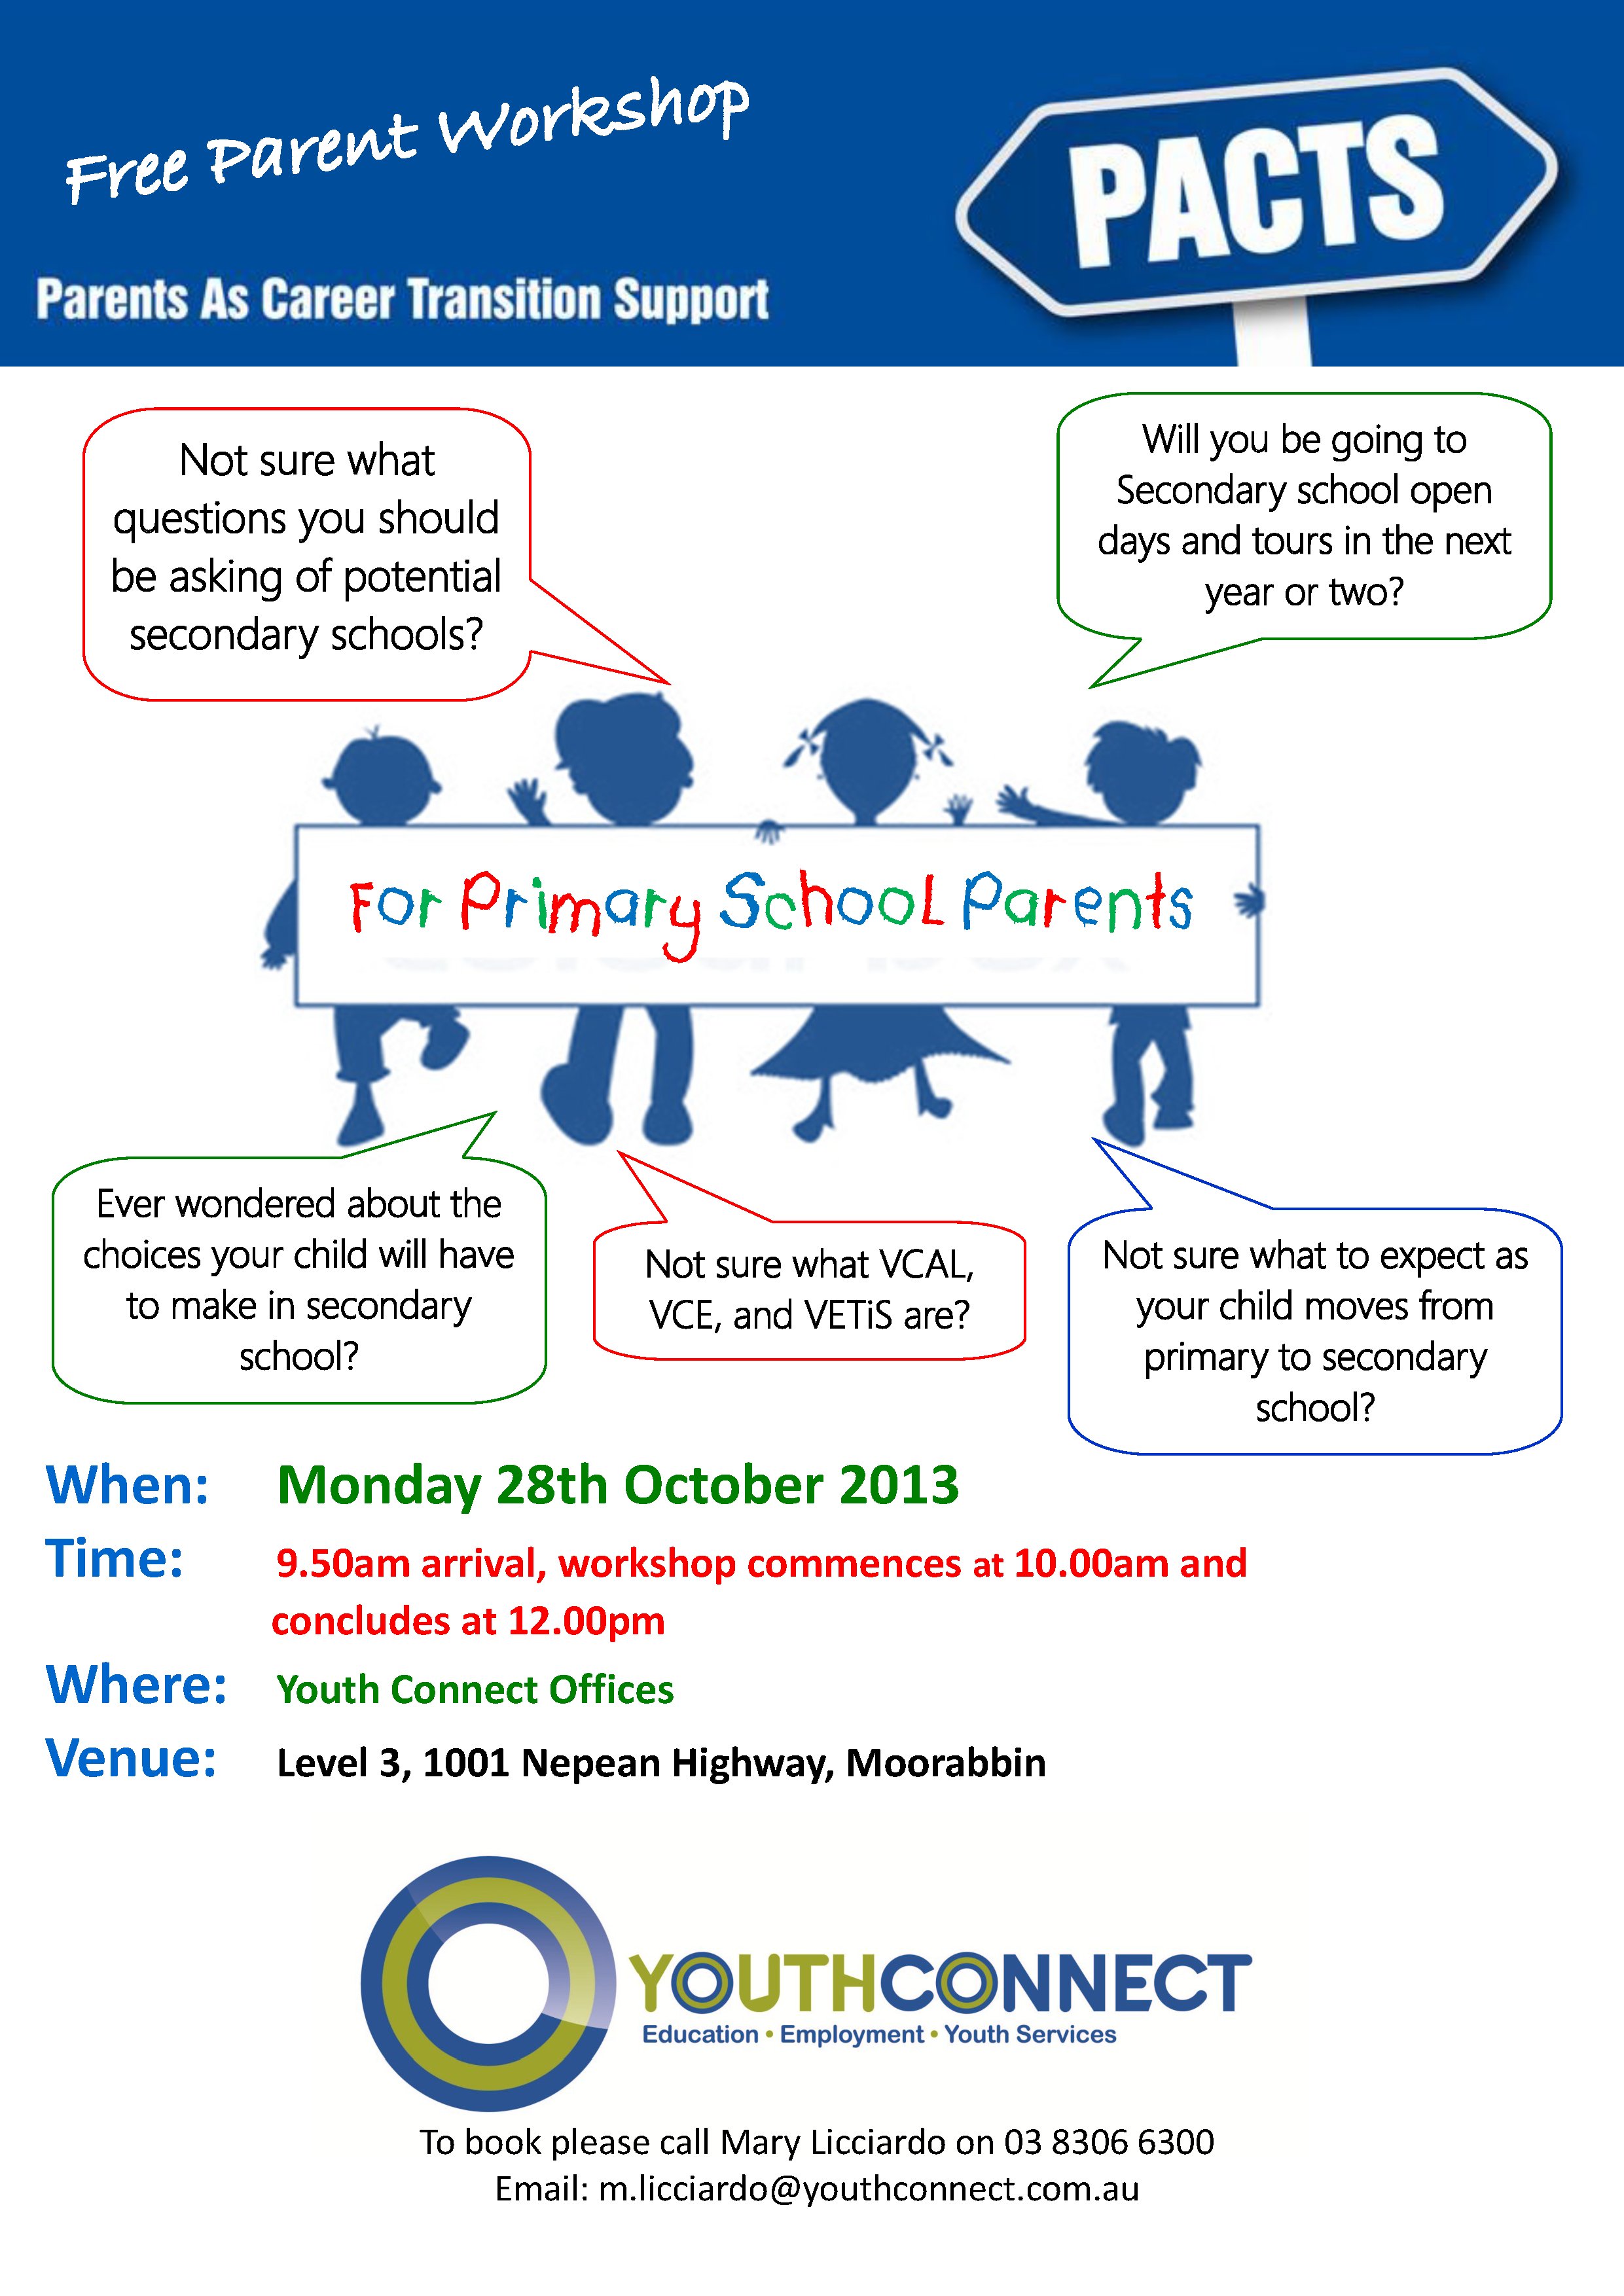 FLYER - PACTS for Primary School Parents